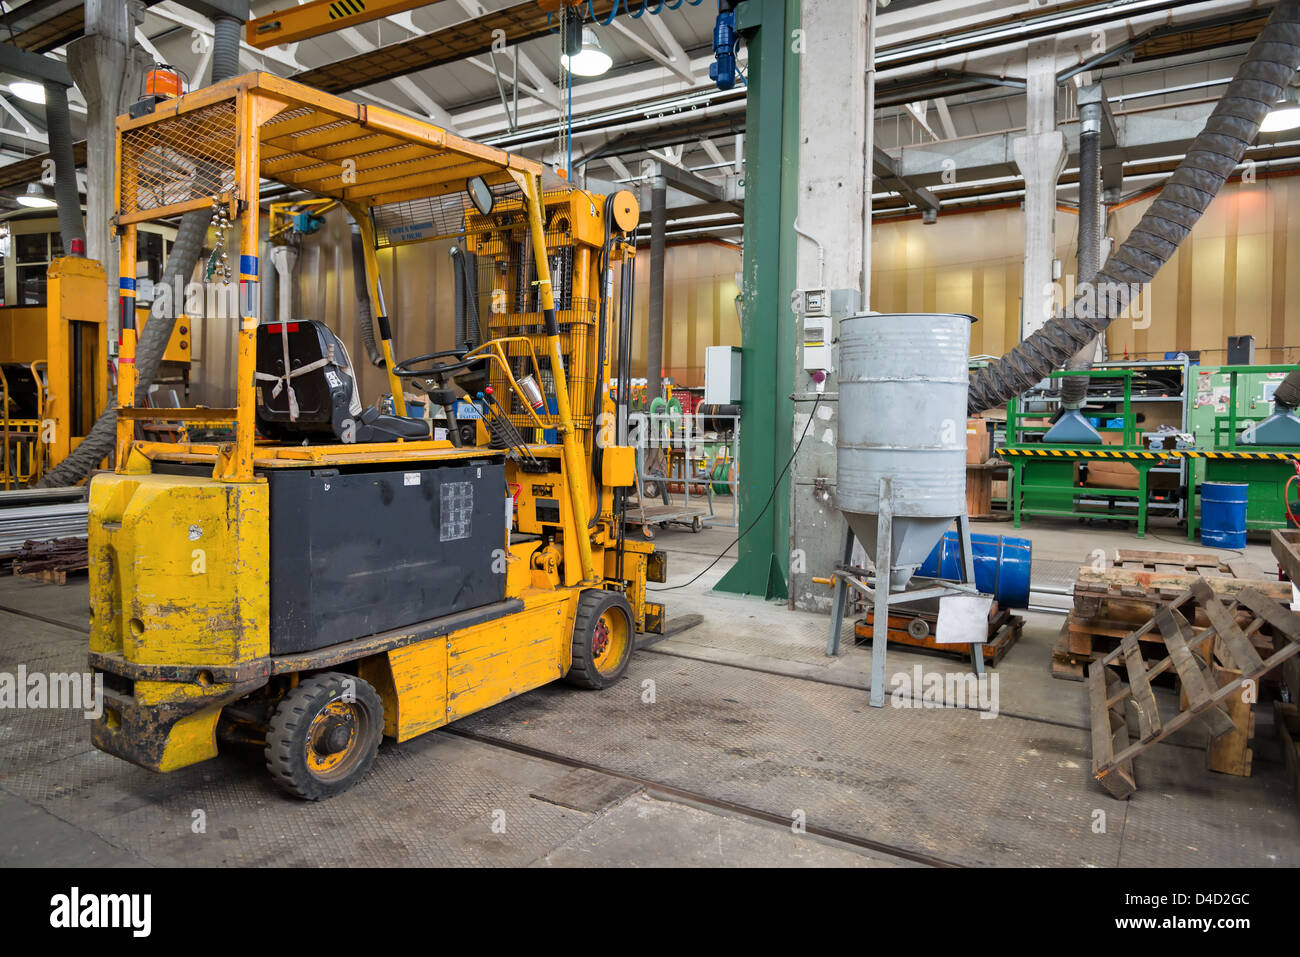 interior of workshop with yellow forklift and tools Stock Photo